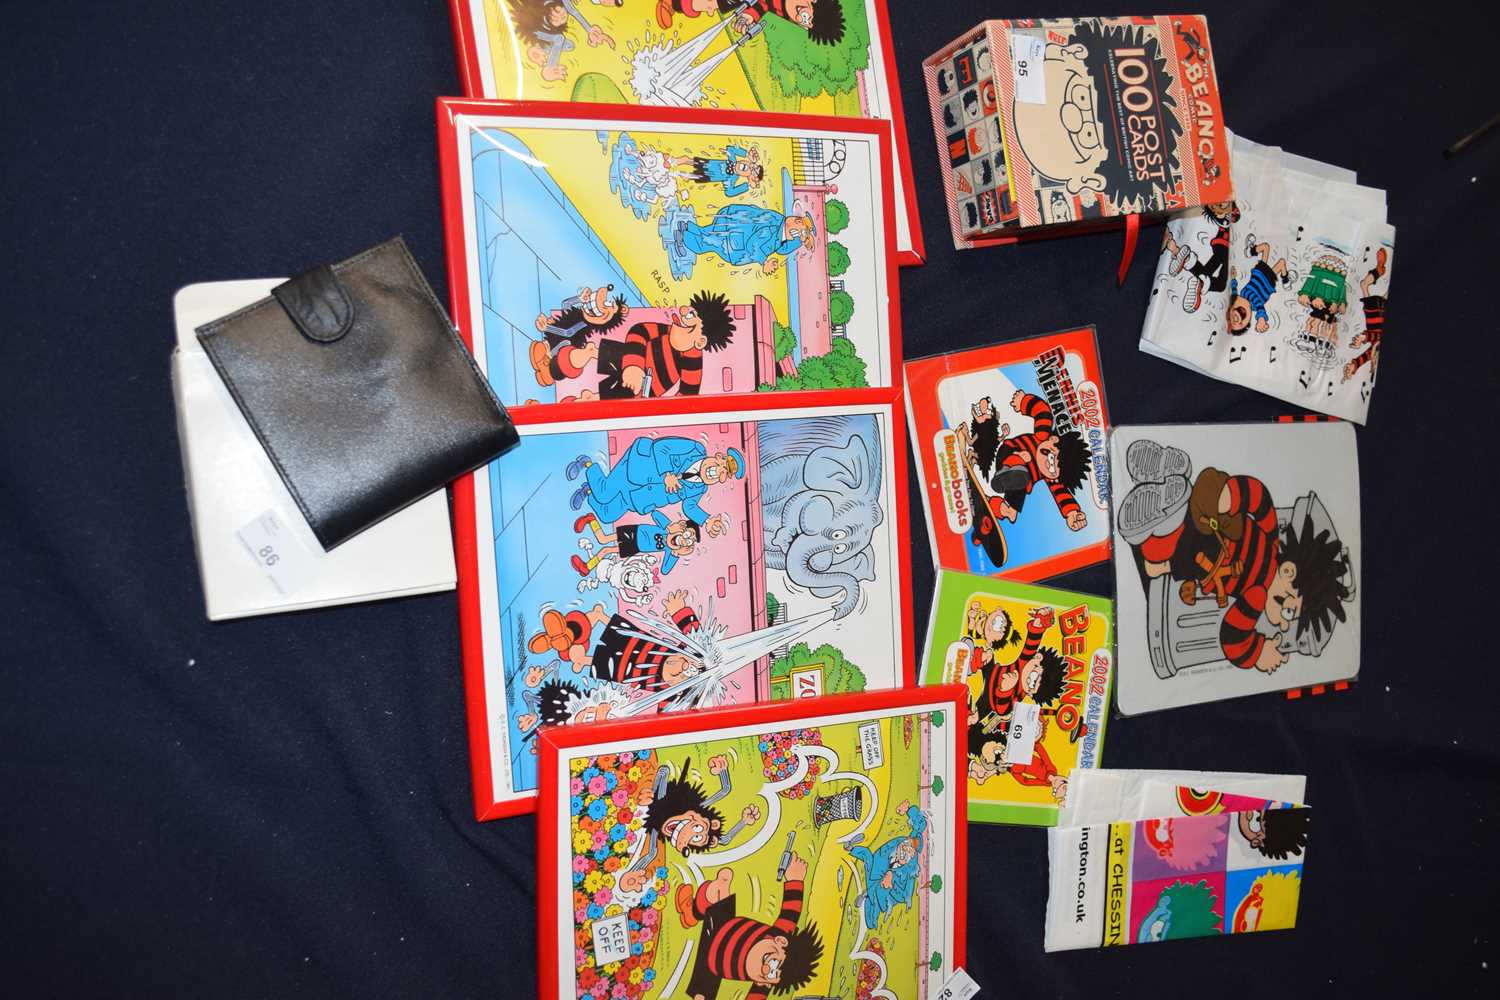 9 'The Beano' Collectors items to include, 3 framed prints, mouse mat, gift bags and desk Calendars